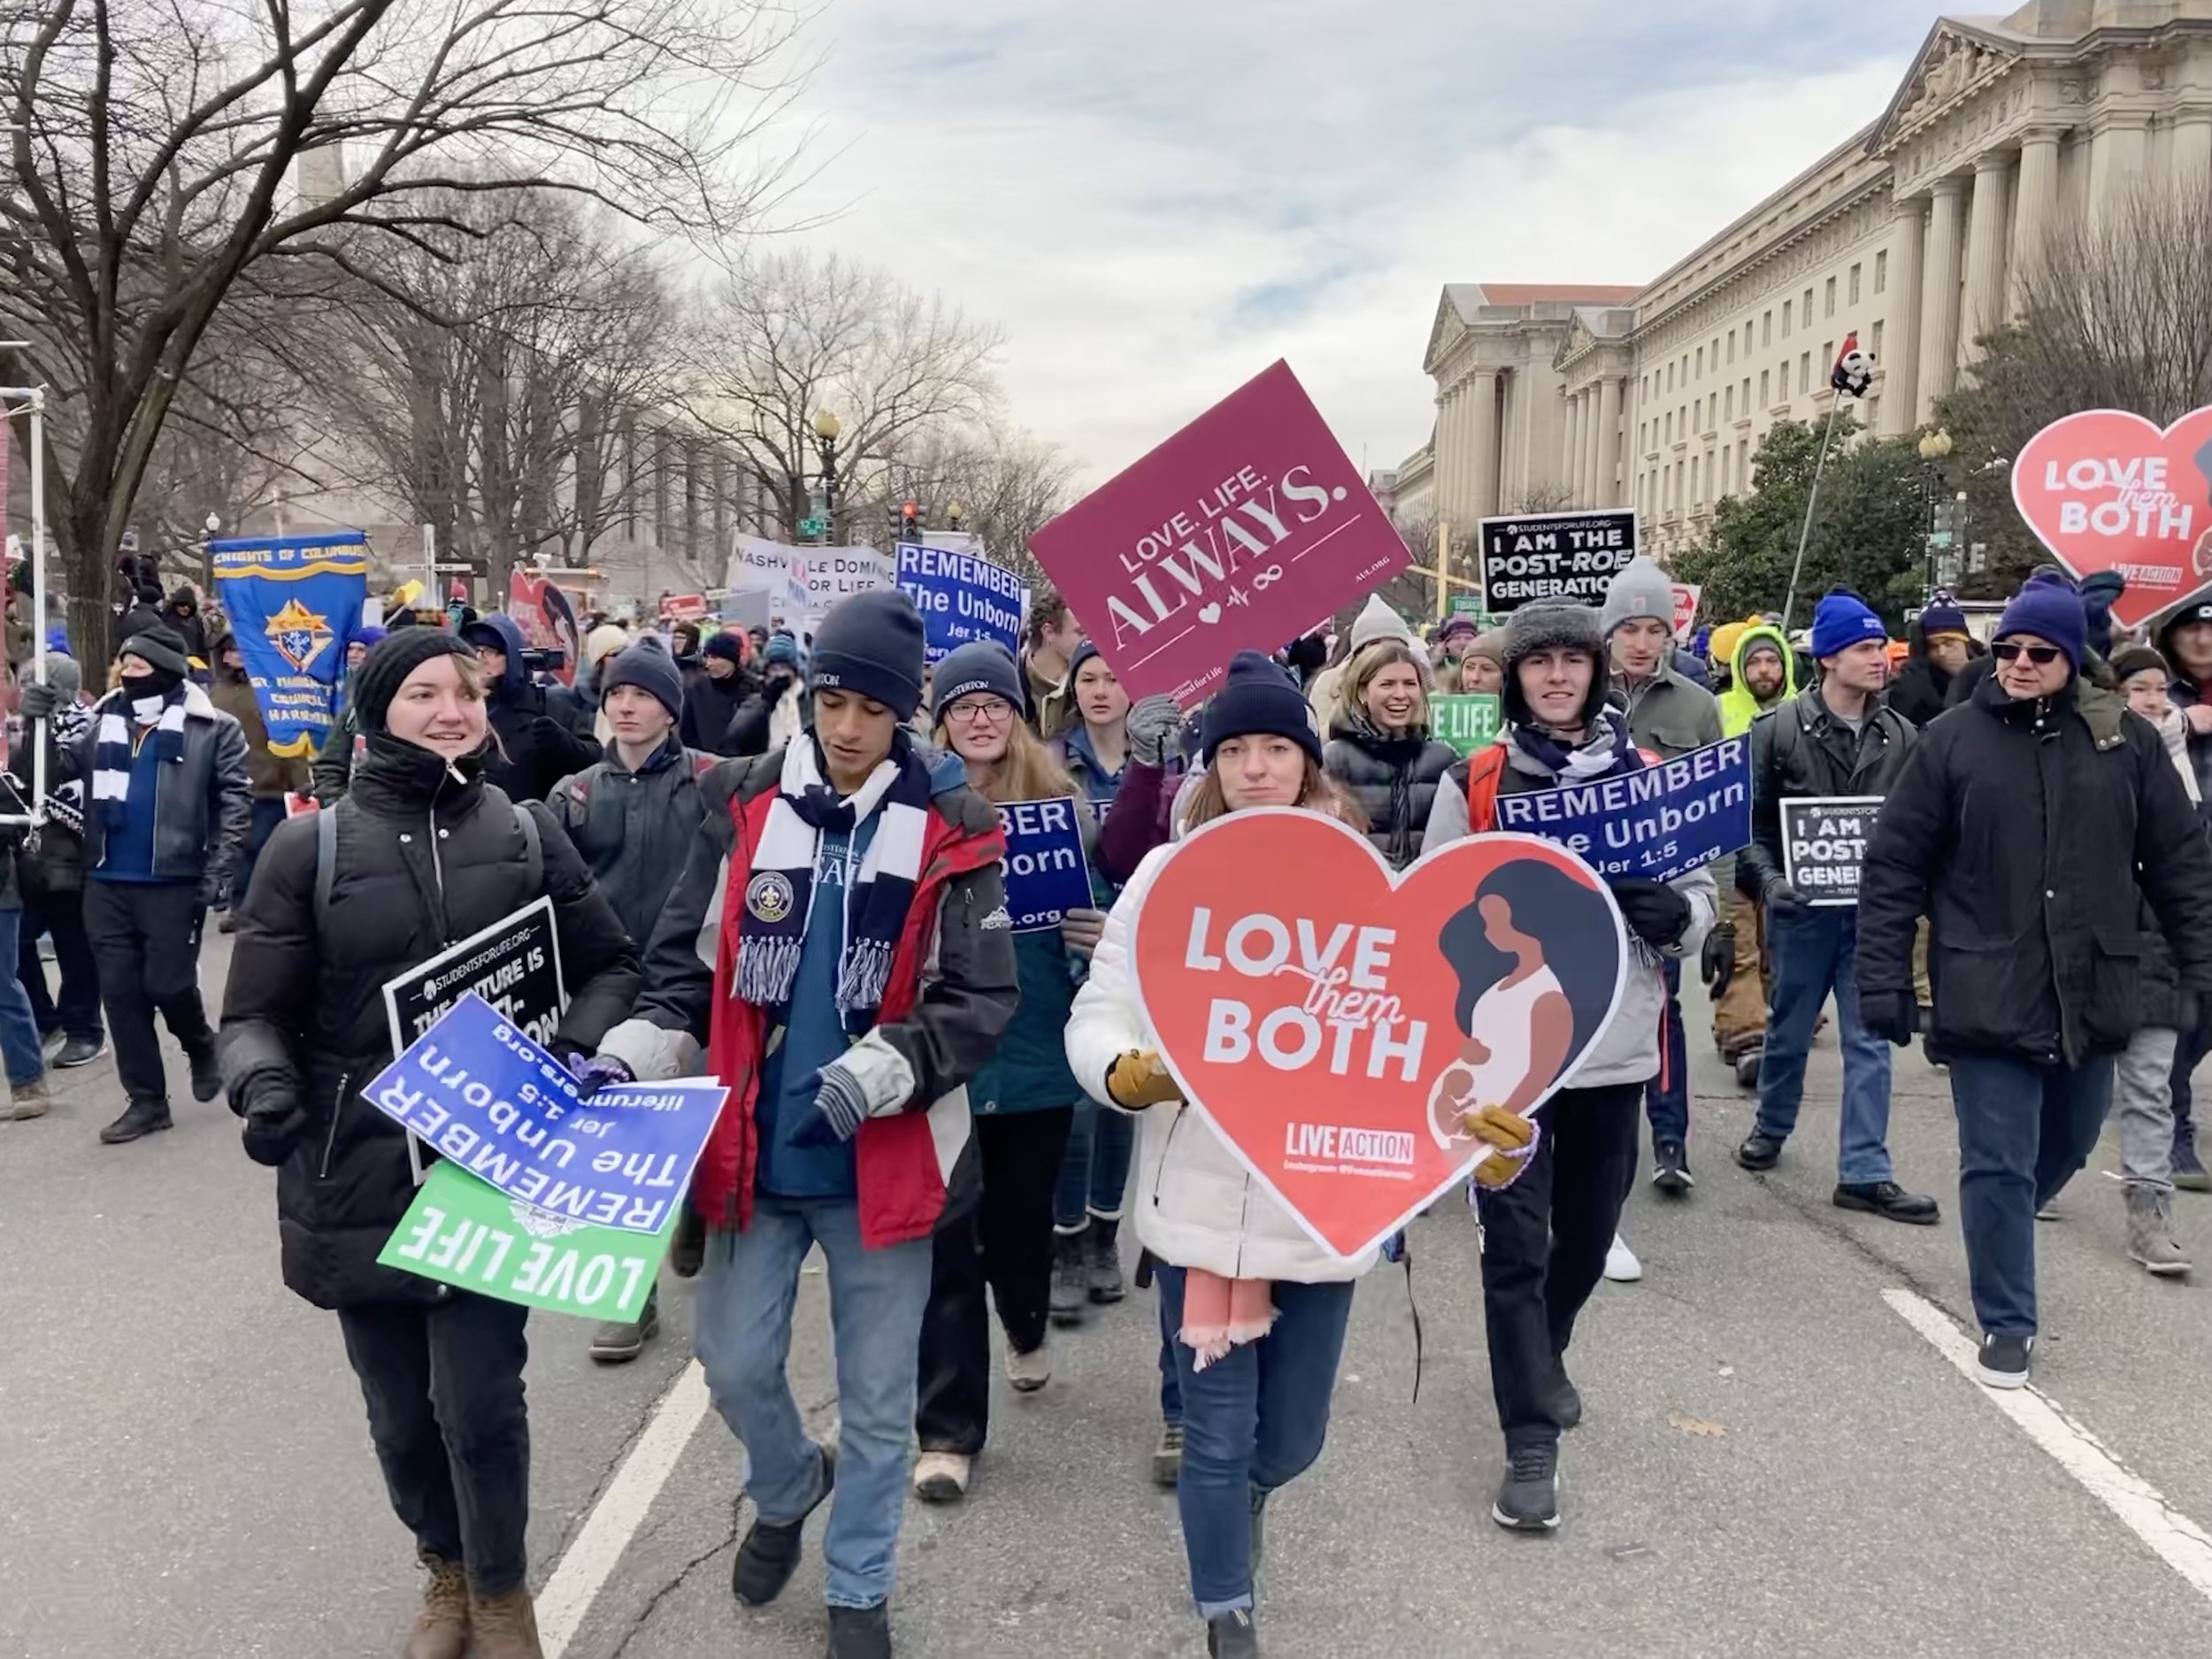 Marching to the US Supreme Court